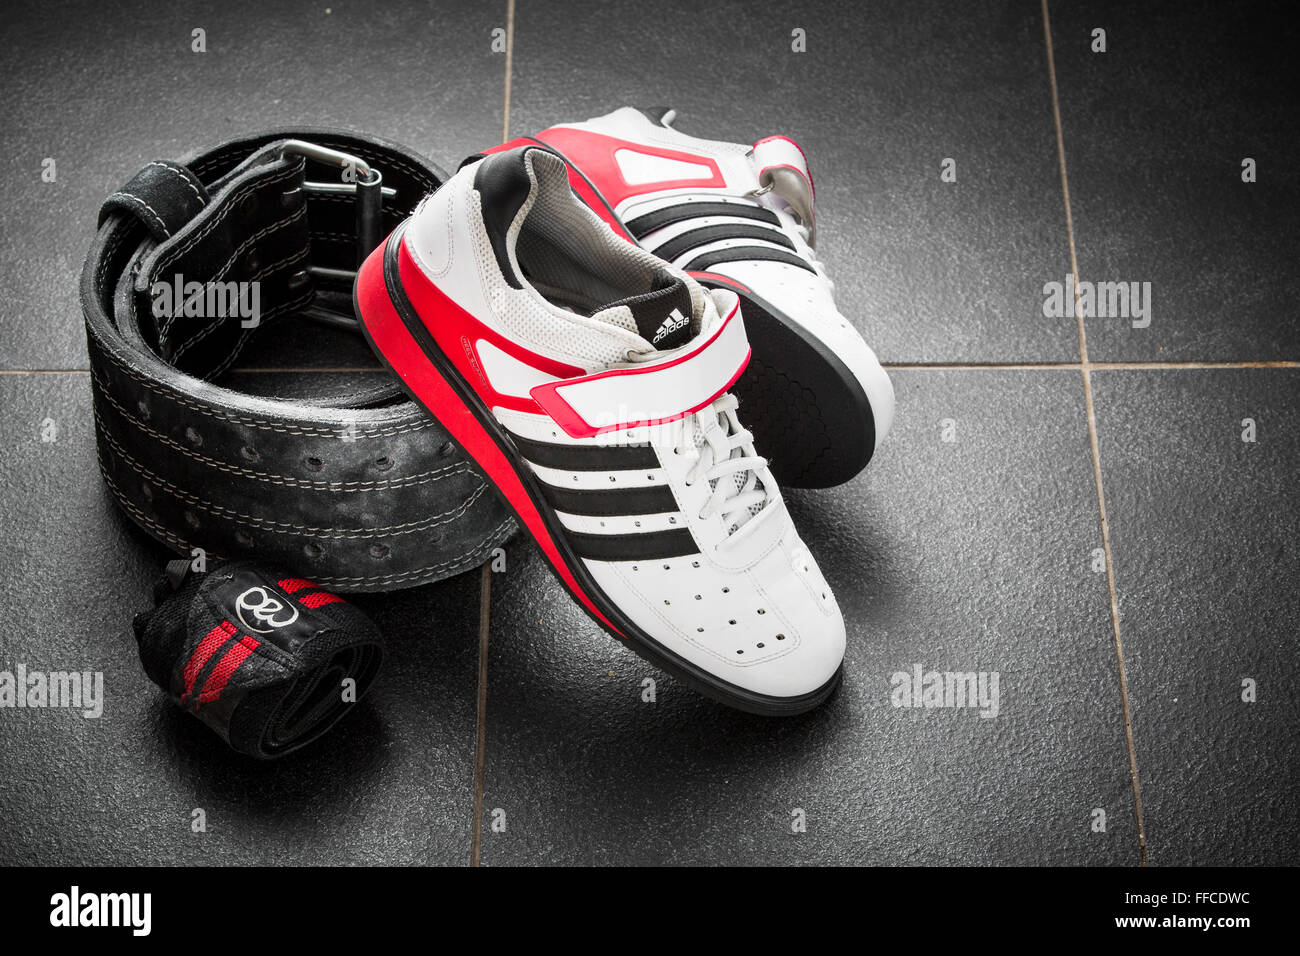 Adidas Olympic weightlifting shoes on a grey tiled floor with a  weightlifting belt and wrist straps Stock Photo - Alamy